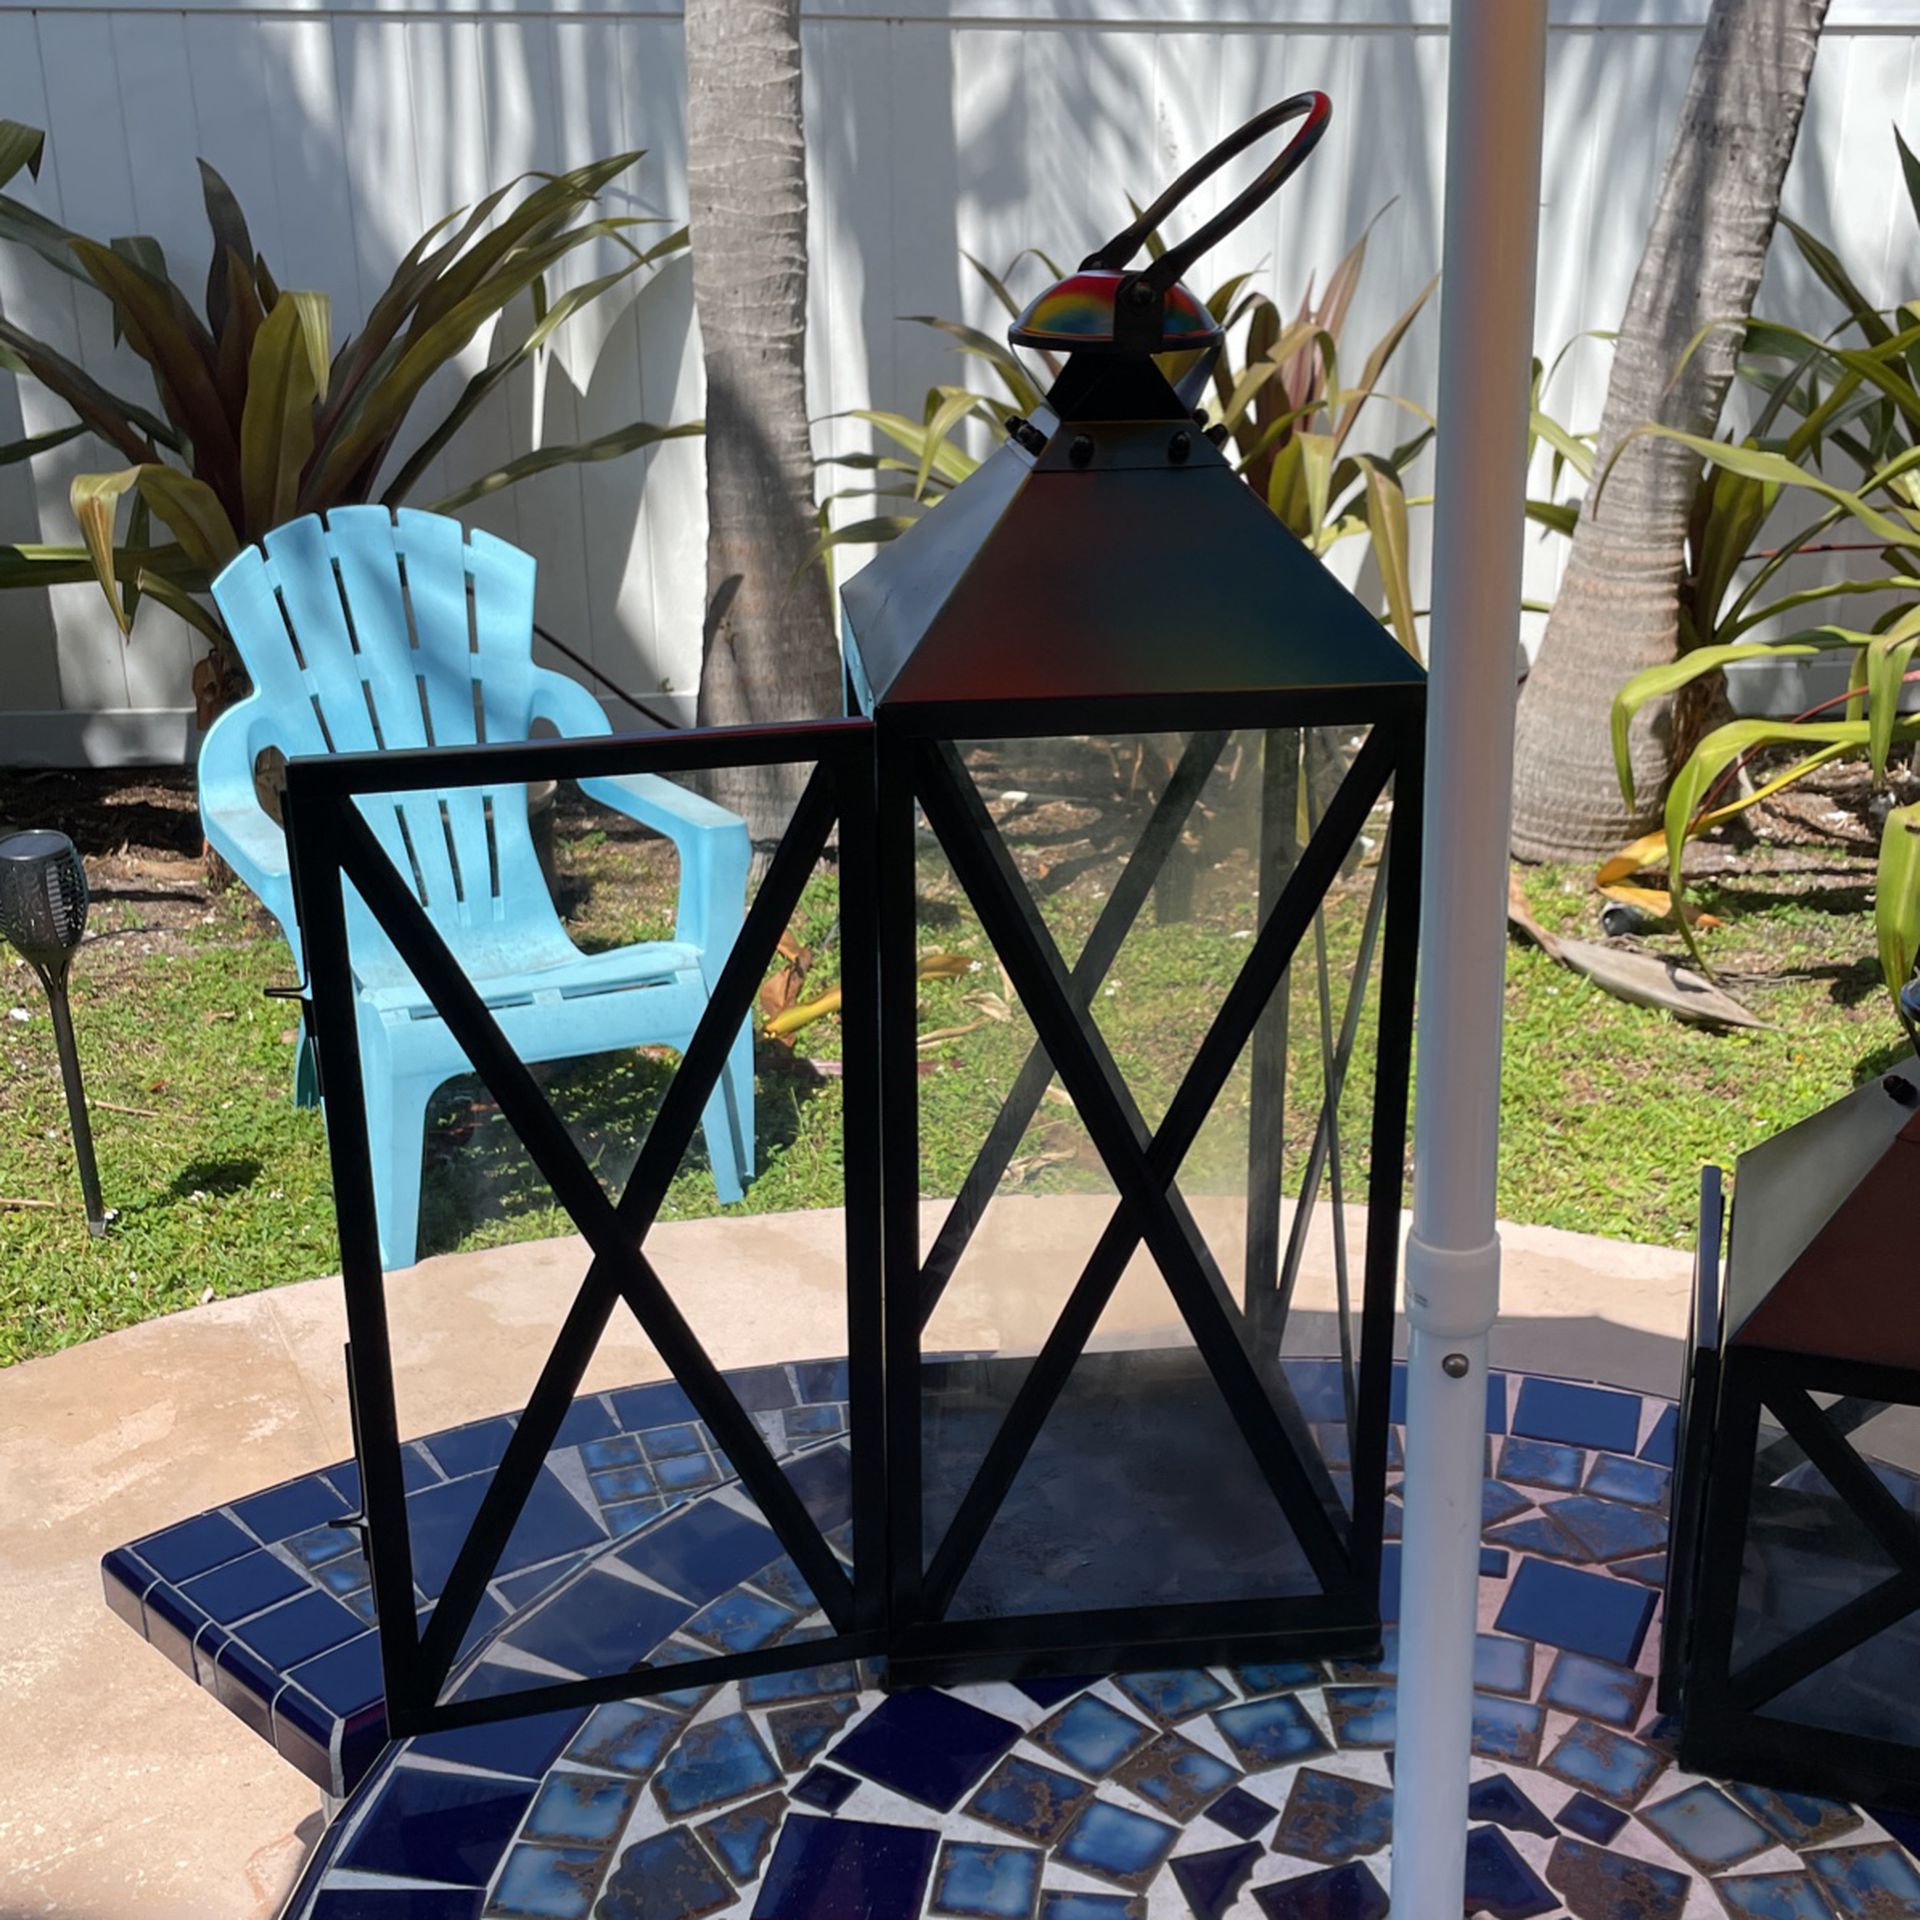 Large outdoor lantern - MISSING ONE GLASS